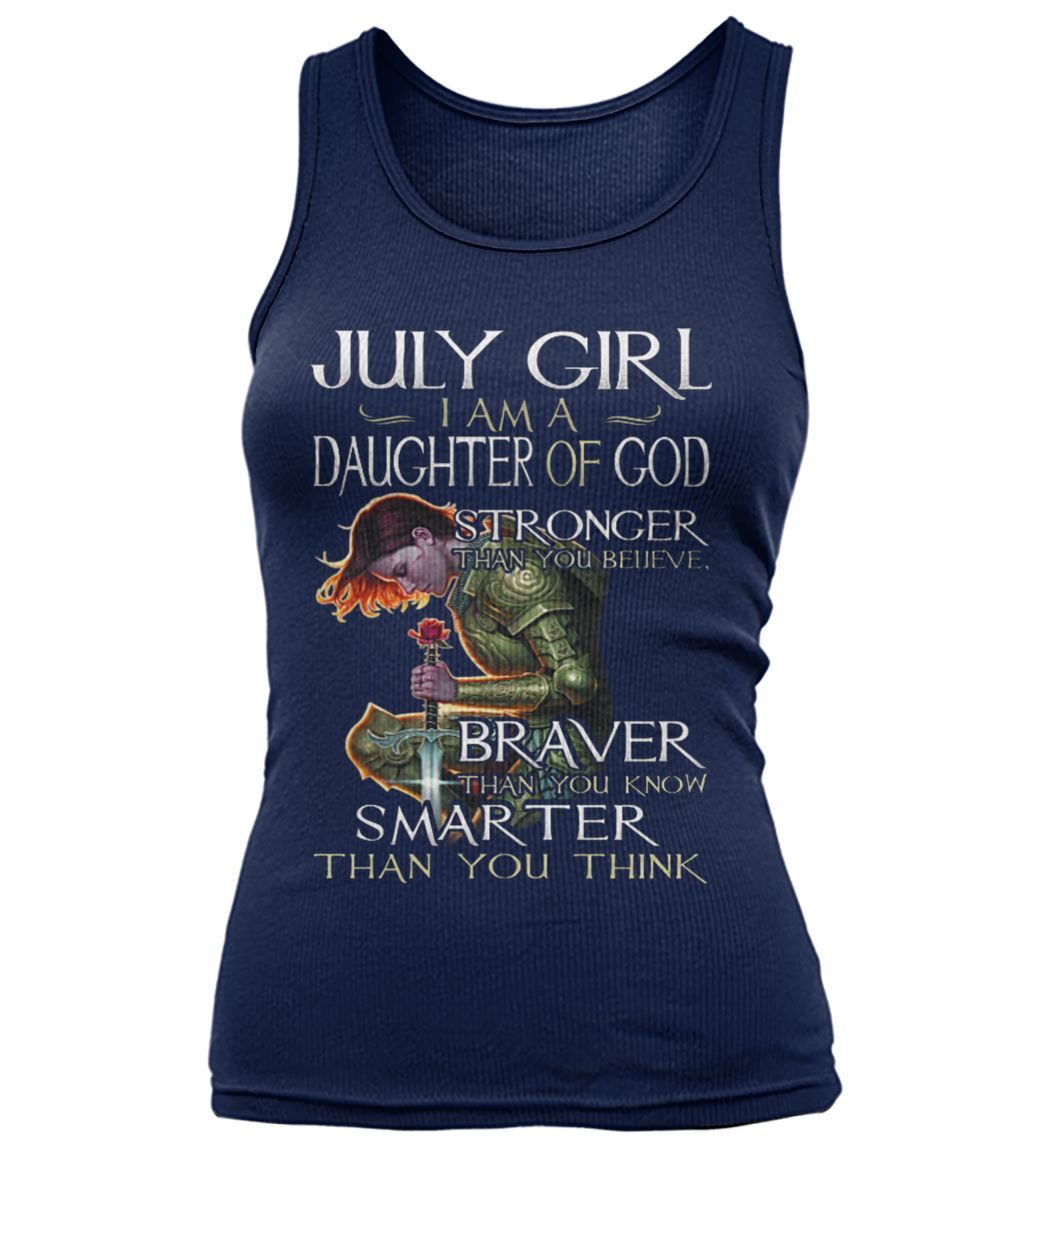 July girl I am a daughter of God stronger than you believe braver than you know smarter than you think women's tank top